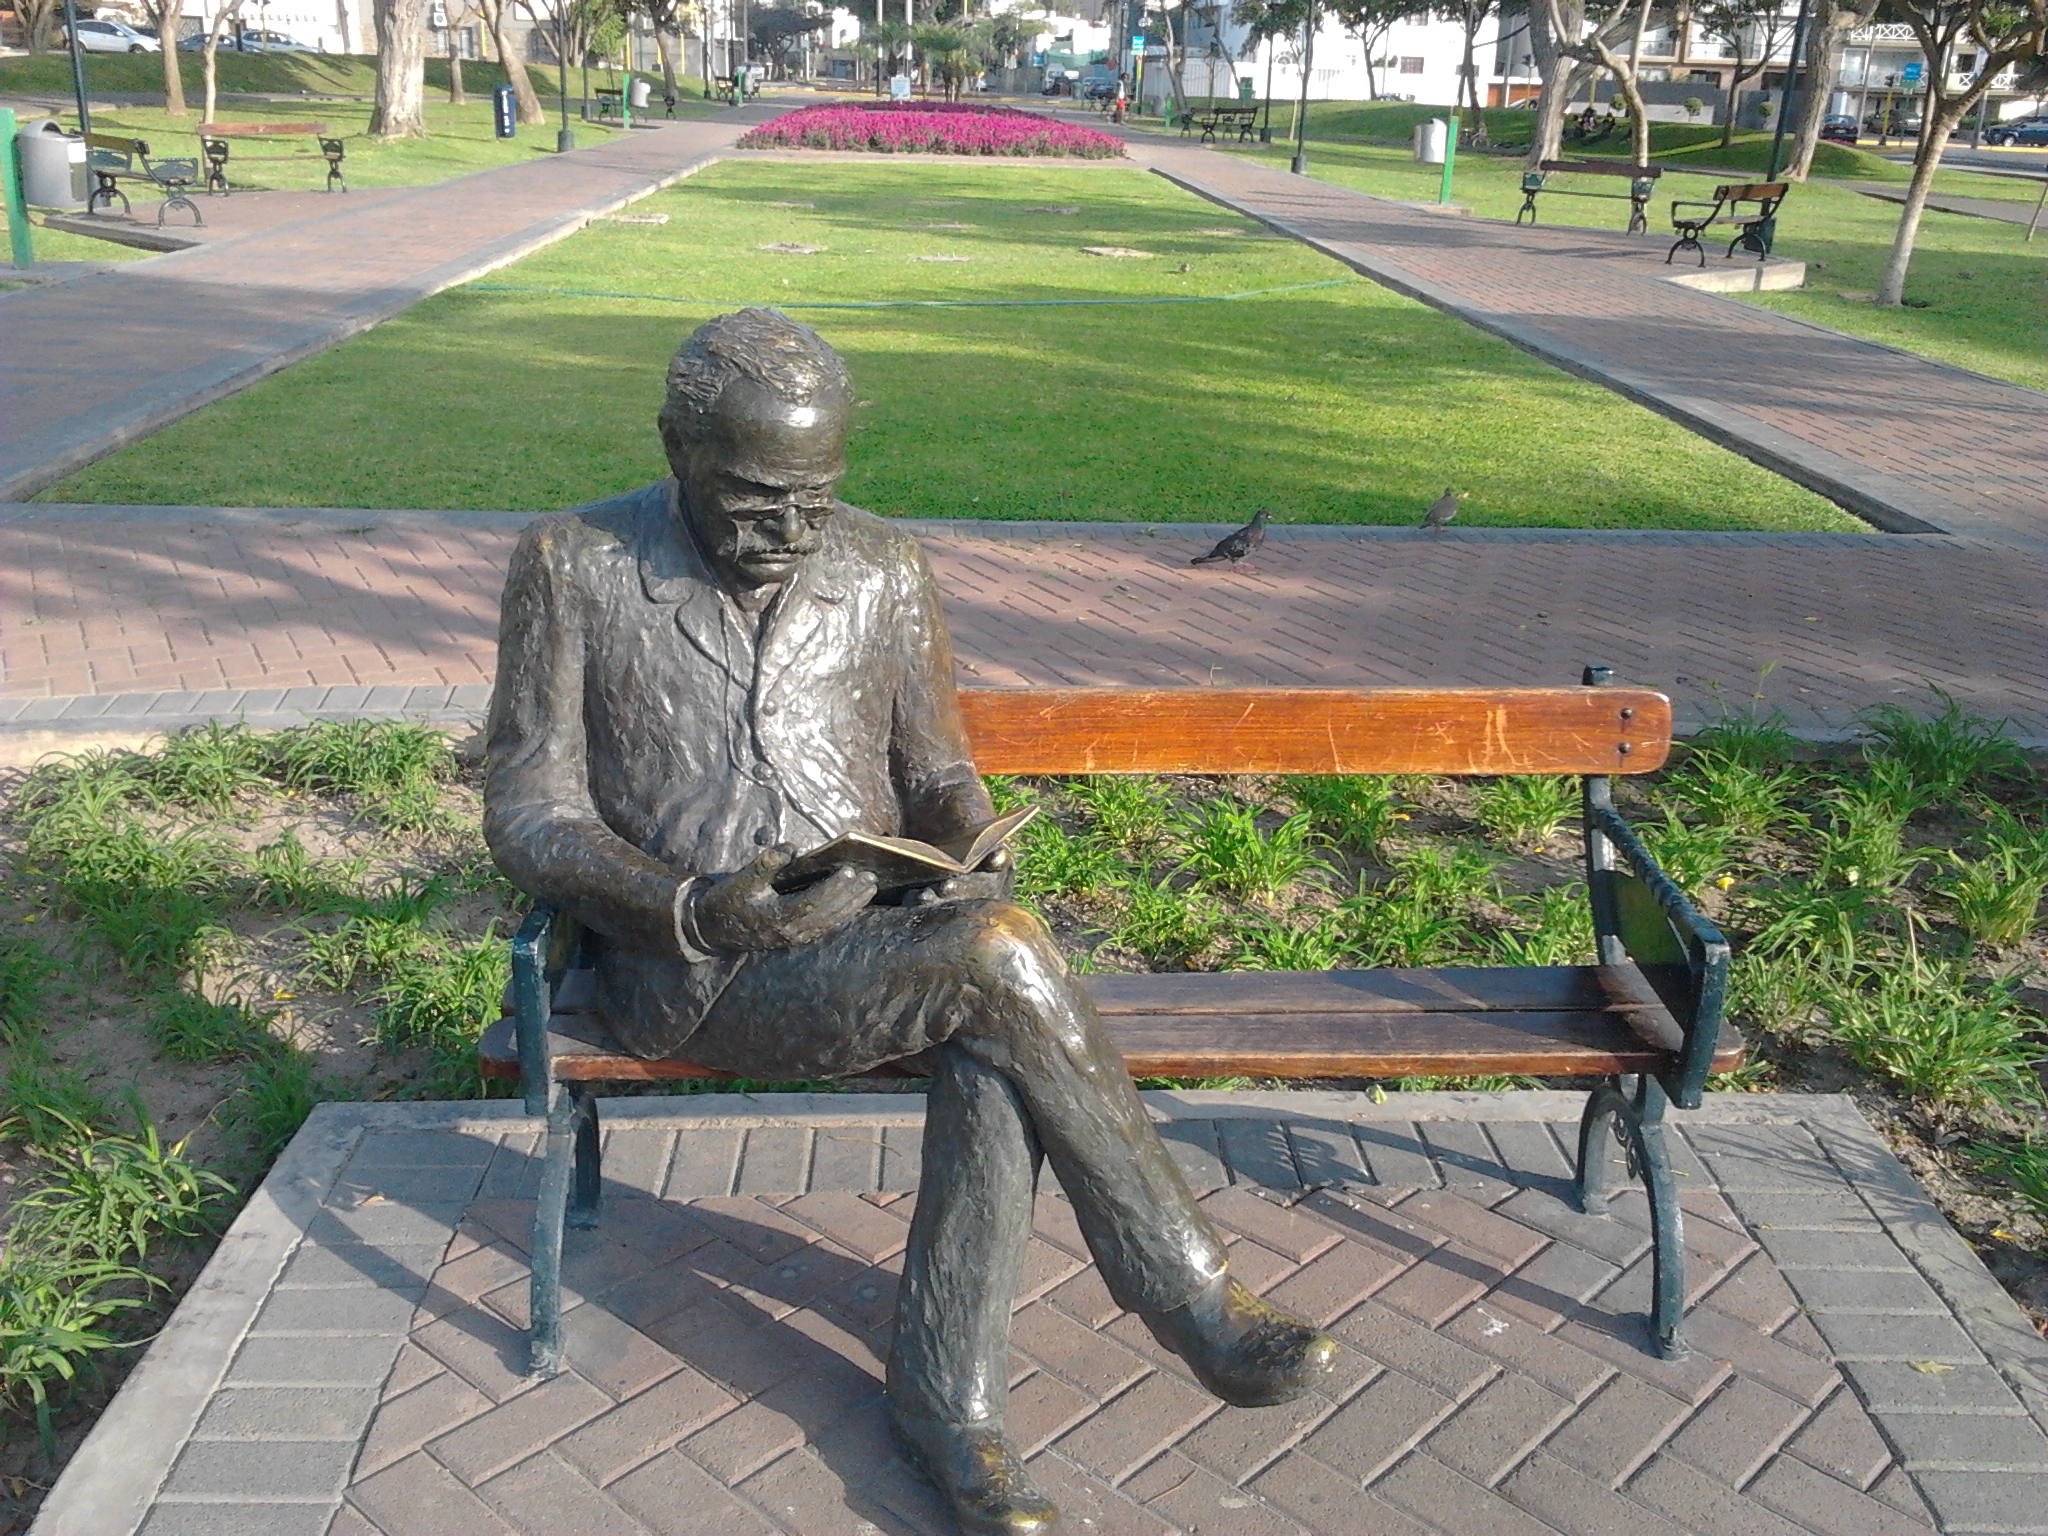 a statue of a man is sitting on a park bench reading